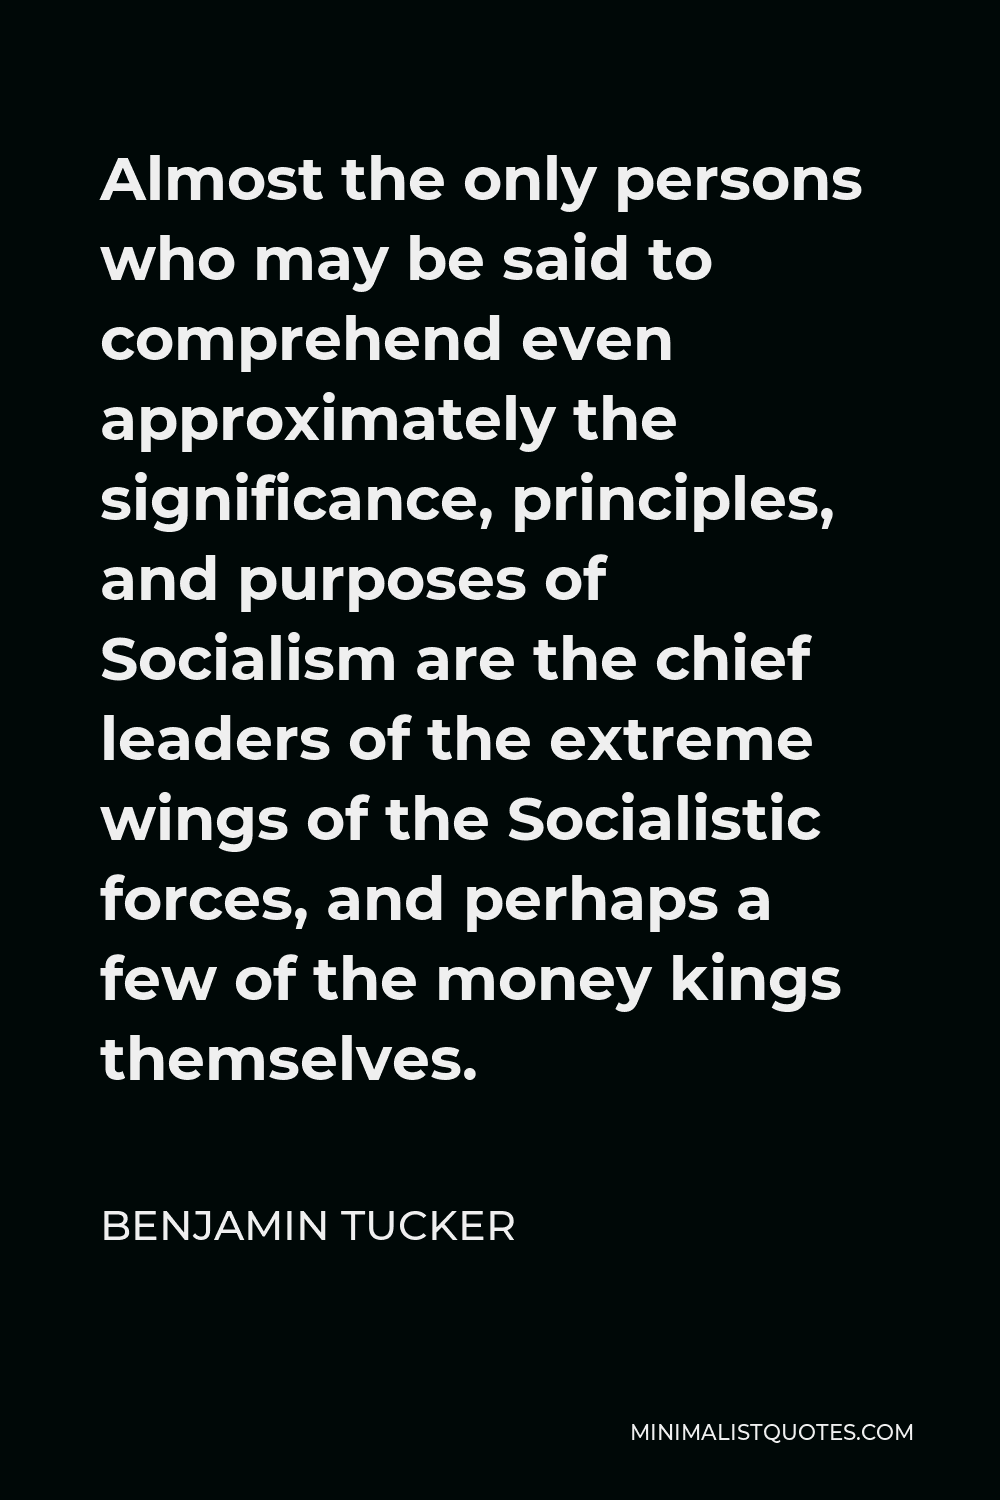 Benjamin Tucker Quote - Almost the only persons who may be said to comprehend even approximately the significance, principles, and purposes of Socialism are the chief leaders of the extreme wings of the Socialistic forces, and perhaps a few of the money kings themselves.